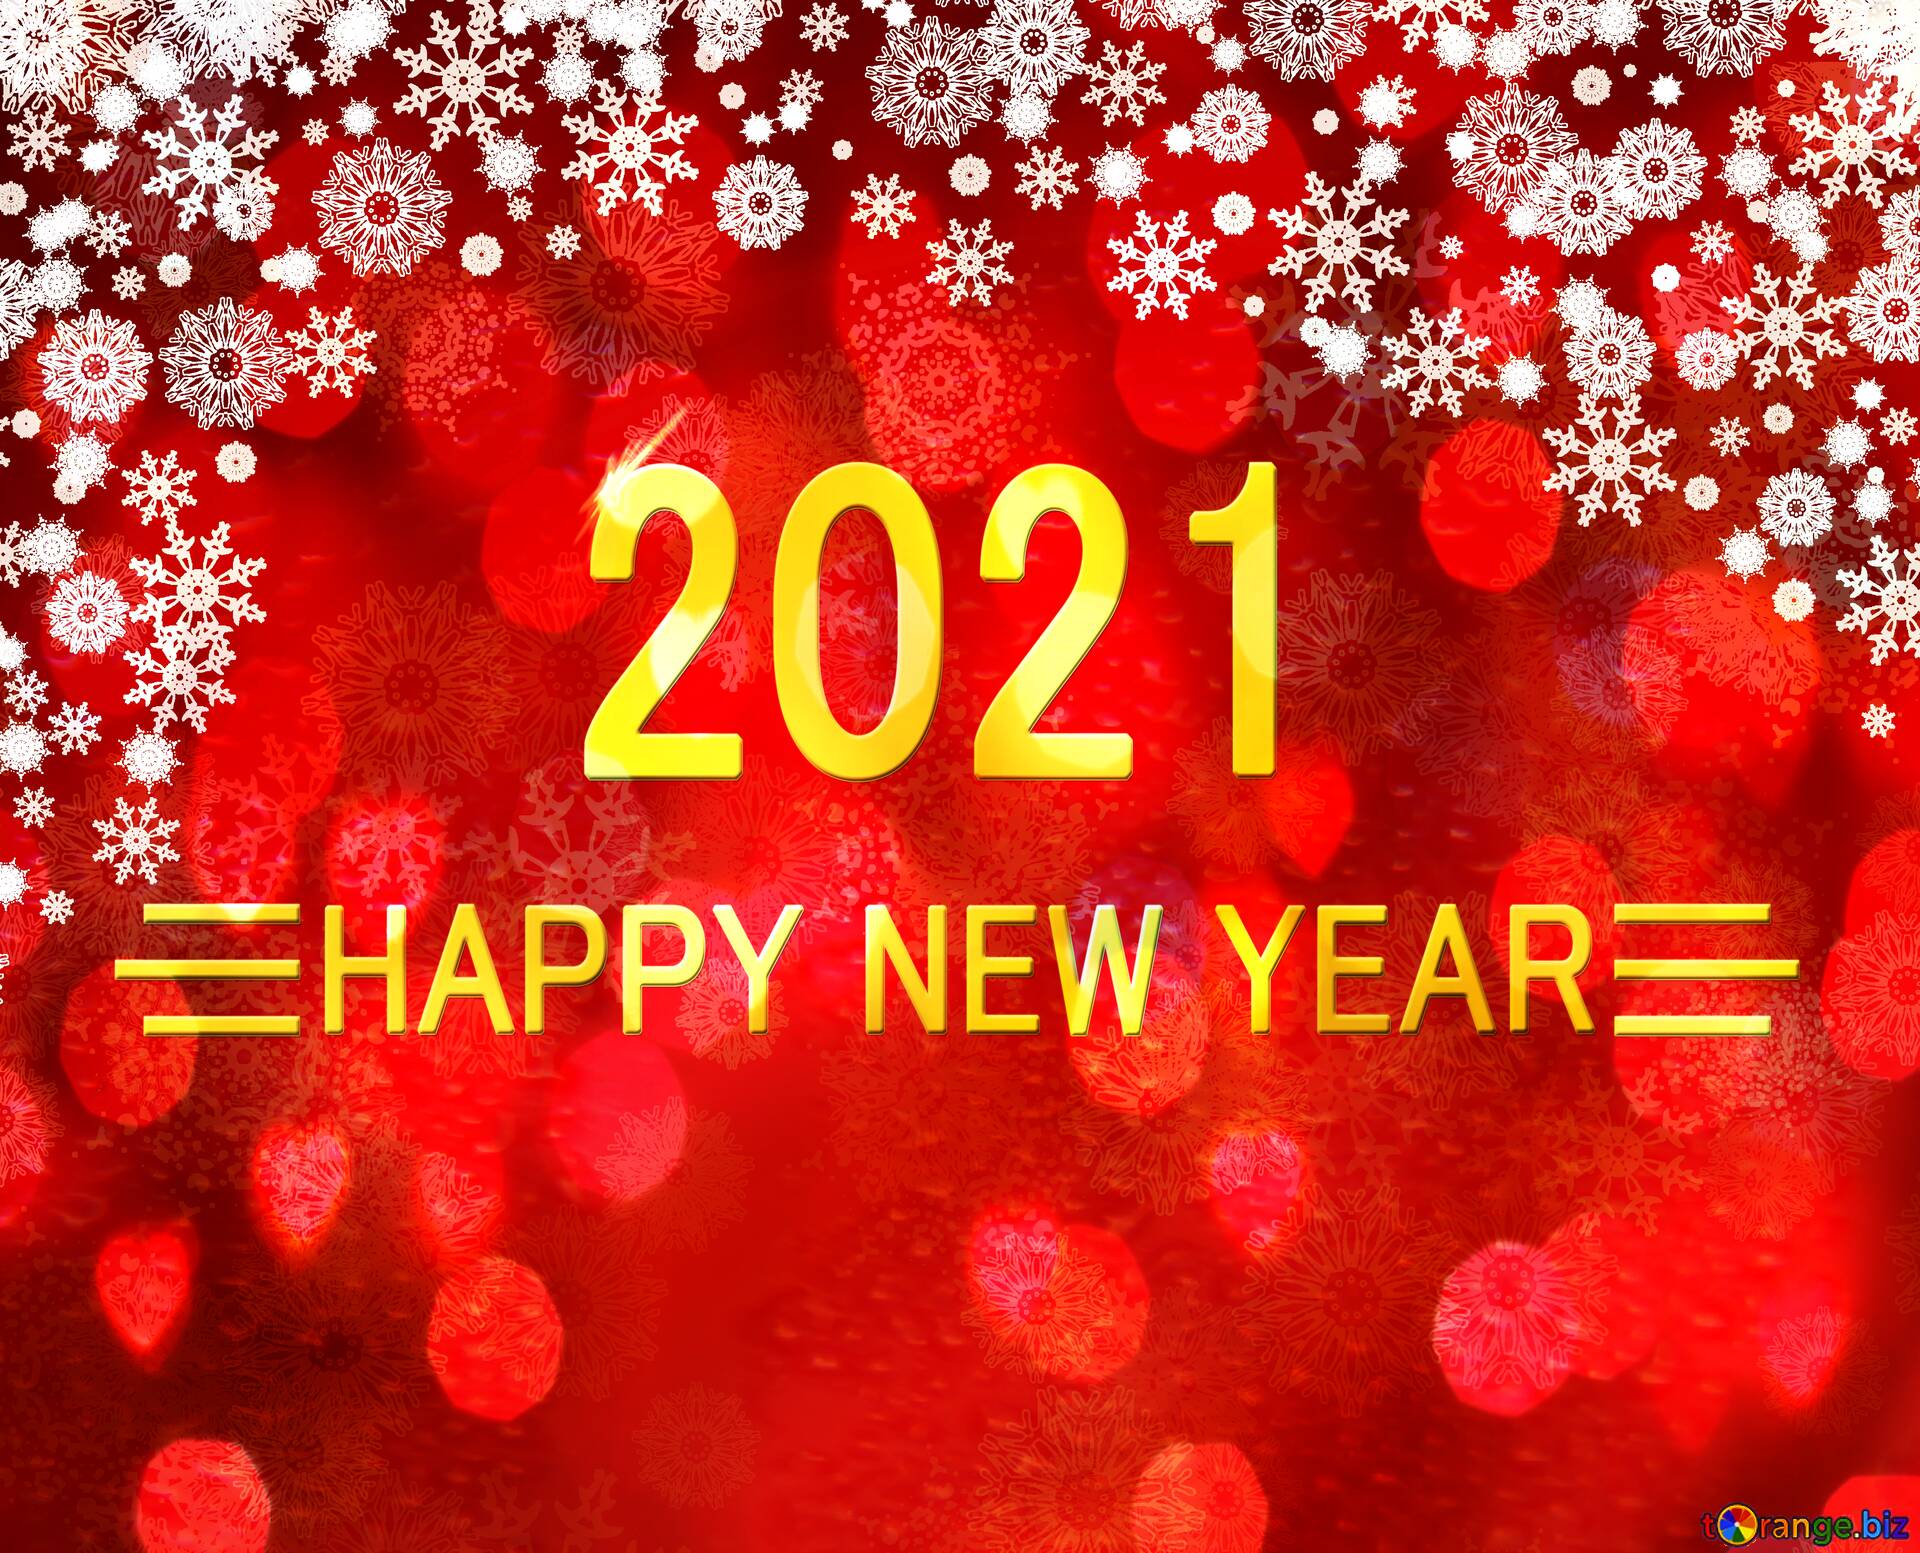 Download Free Picture Red Christmas Background Shiny Happy New Year 2021 Gold On CC BY License Free Image Stock TOrange.biz Fx №212712